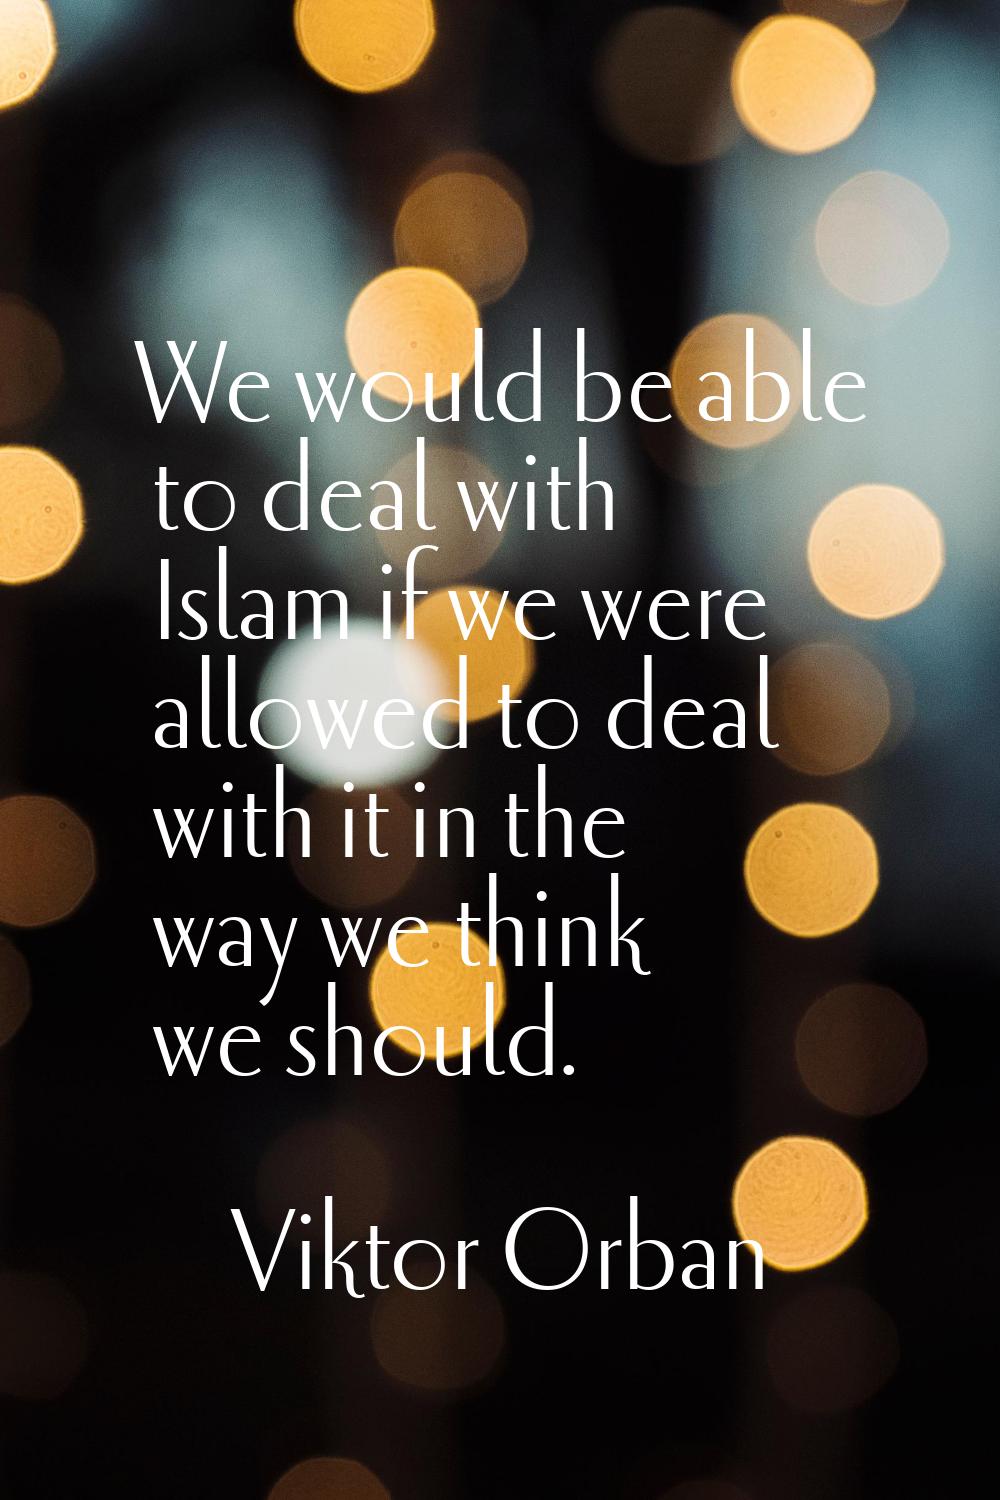 We would be able to deal with Islam if we were allowed to deal with it in the way we think we shoul